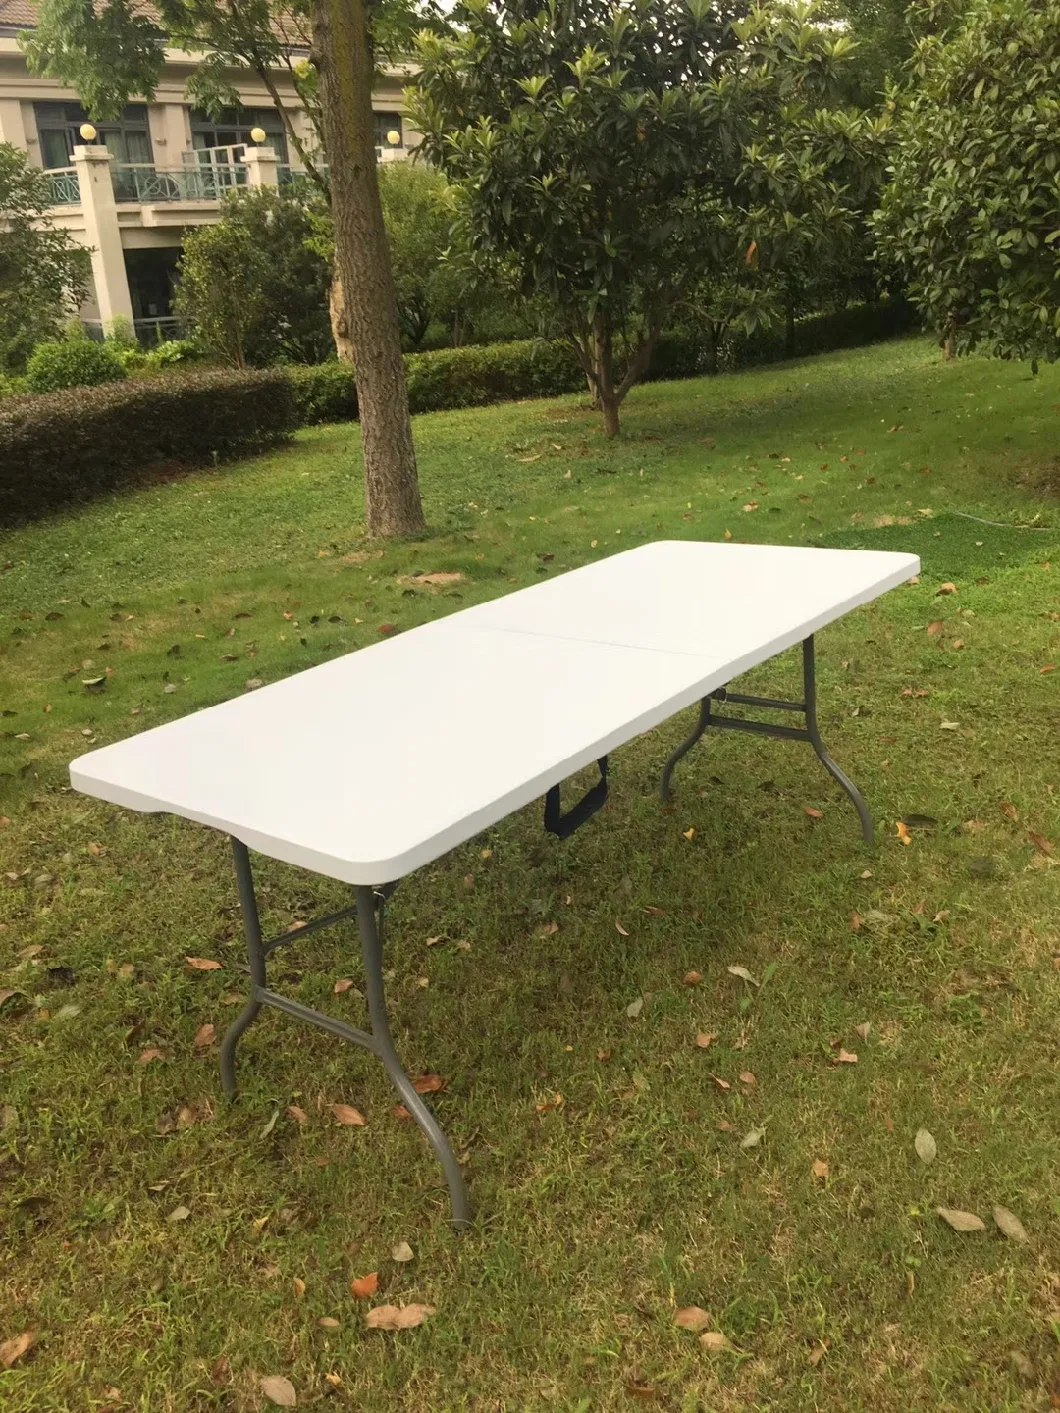 6FT Plastic Half Folding Picnic Table Chairs for Events Banquet